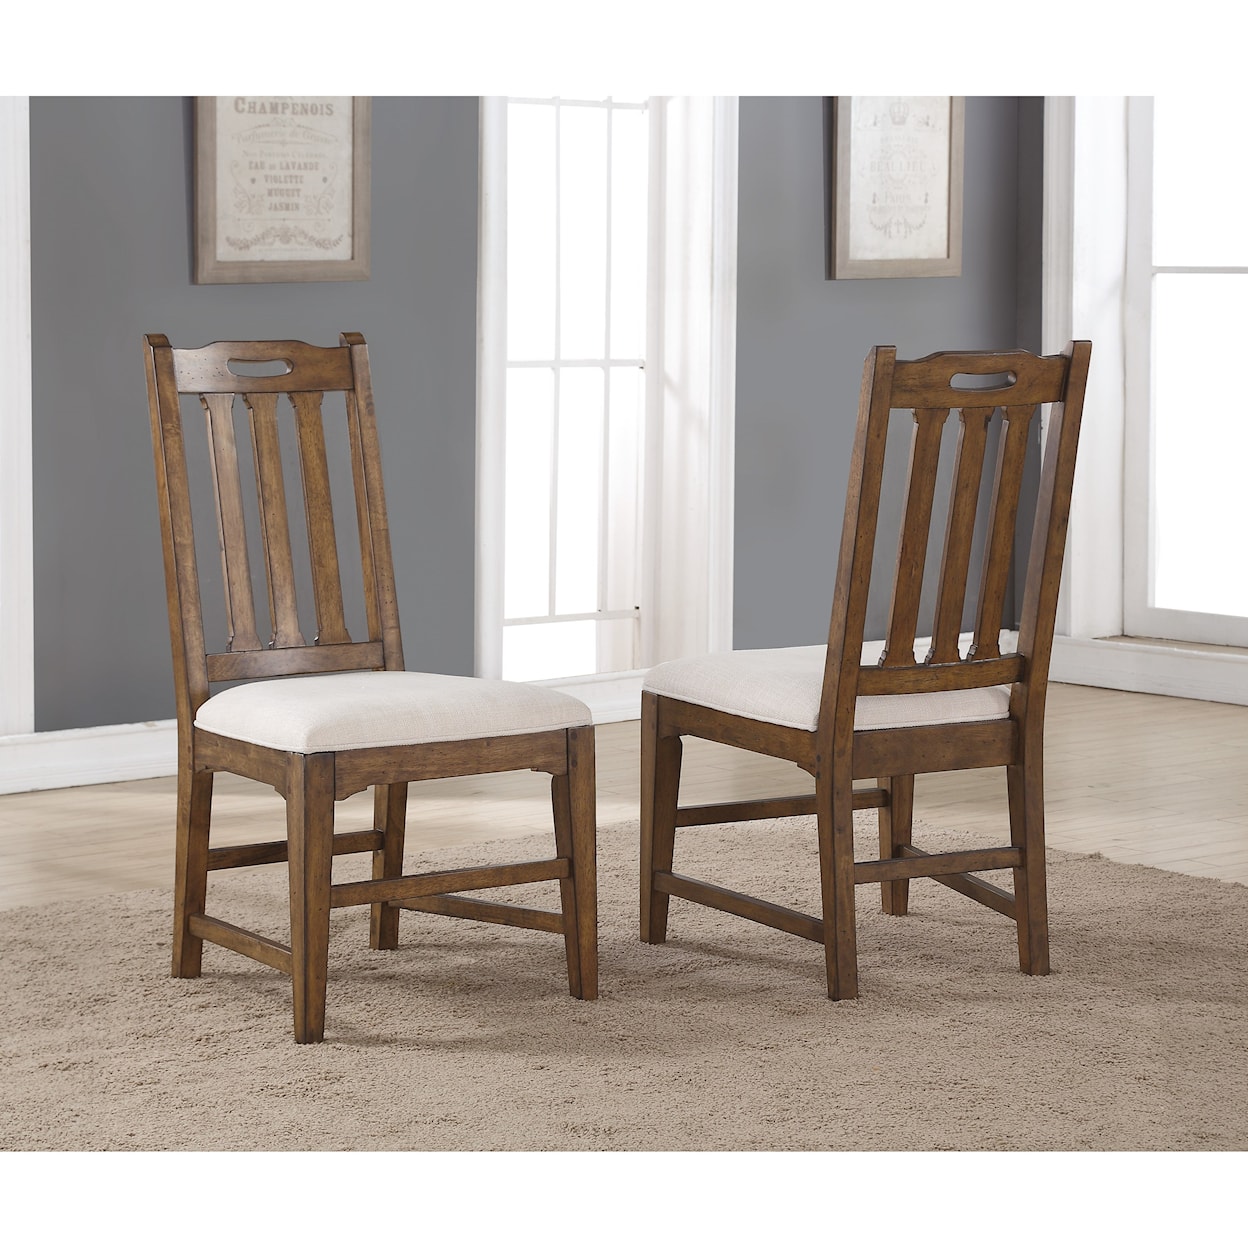 Wynwood, A Flexsteel Company Sonora Upholstered Dining Chair